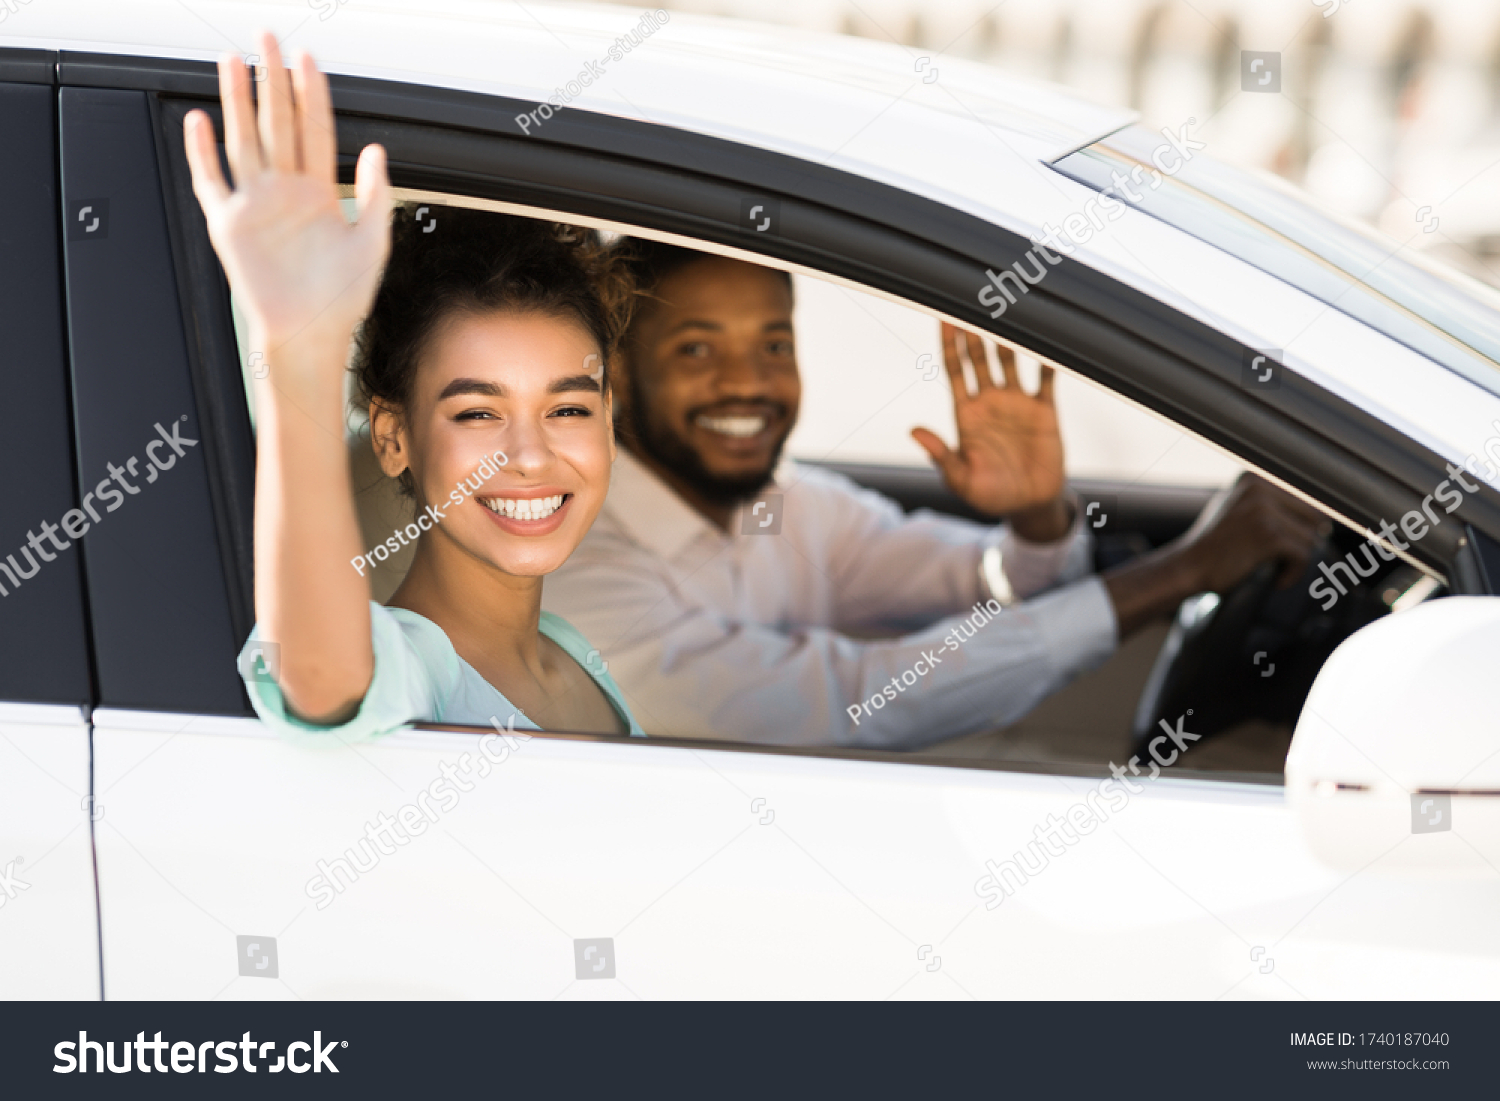 Car Trip. Happy African American Couple Waving Good Bye Sitting In Auto During Ride. Selective Focus #1740187040